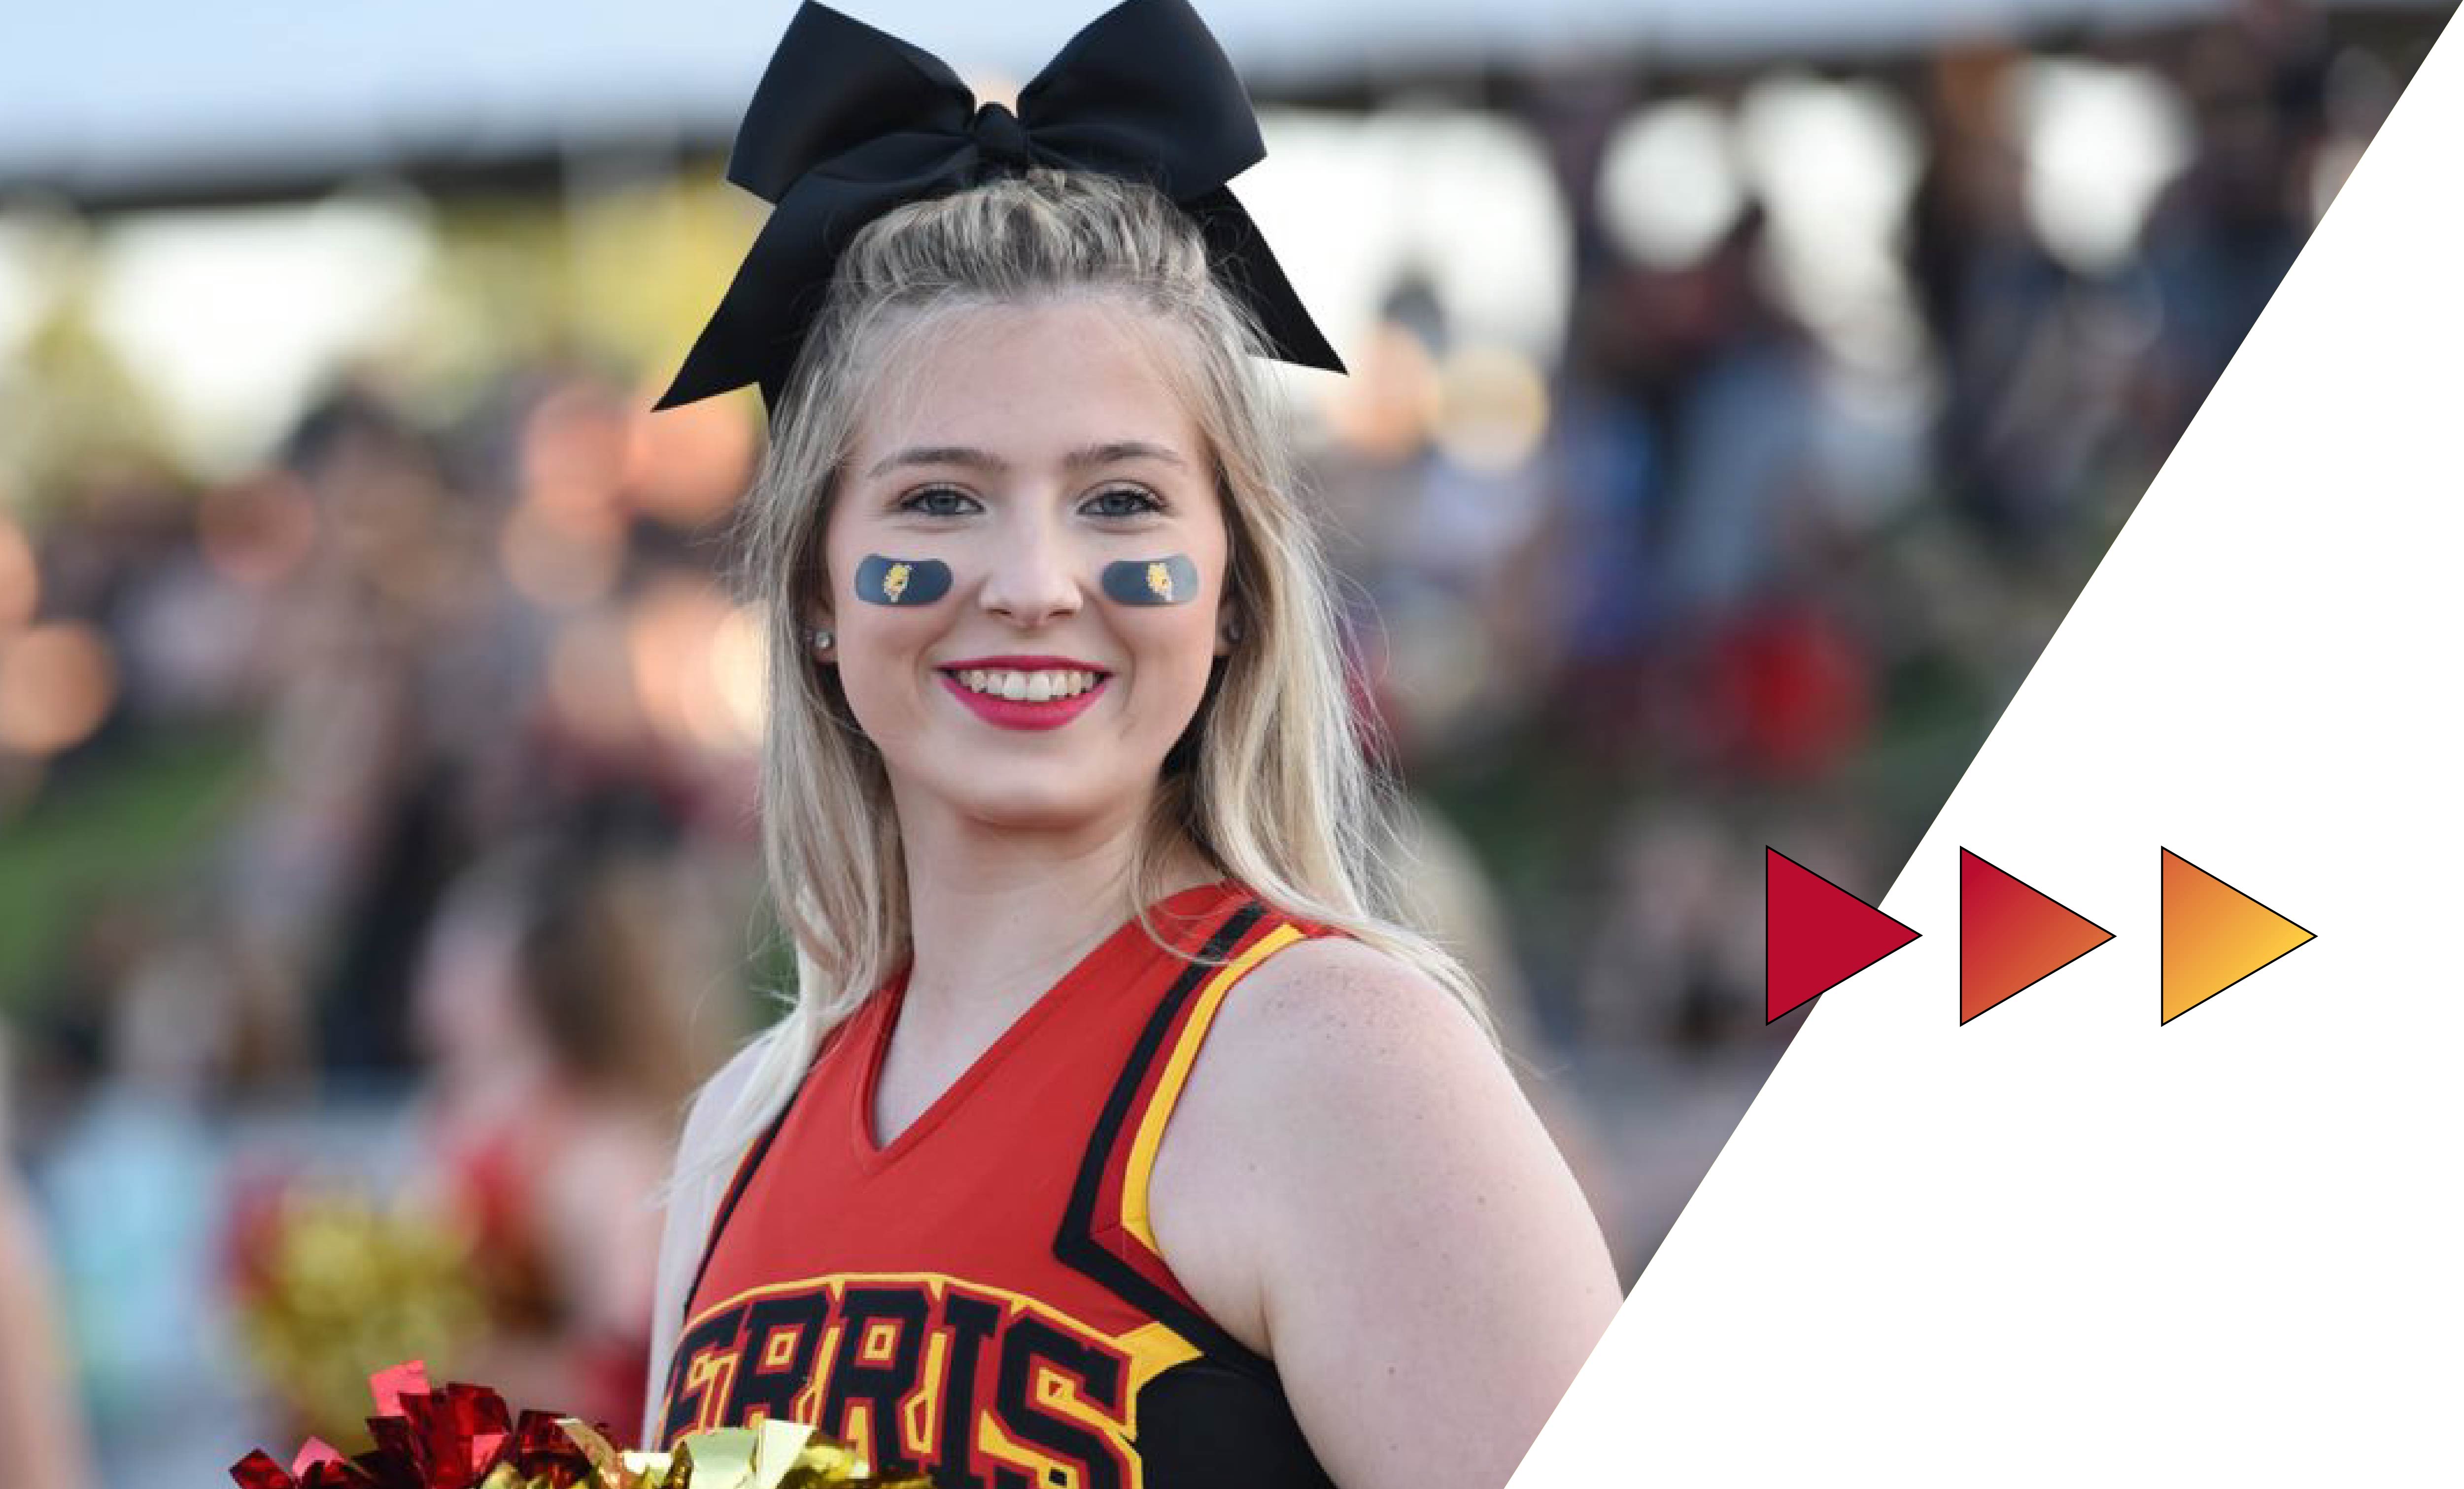 Ferris State cheerleader on the sideline at a football game